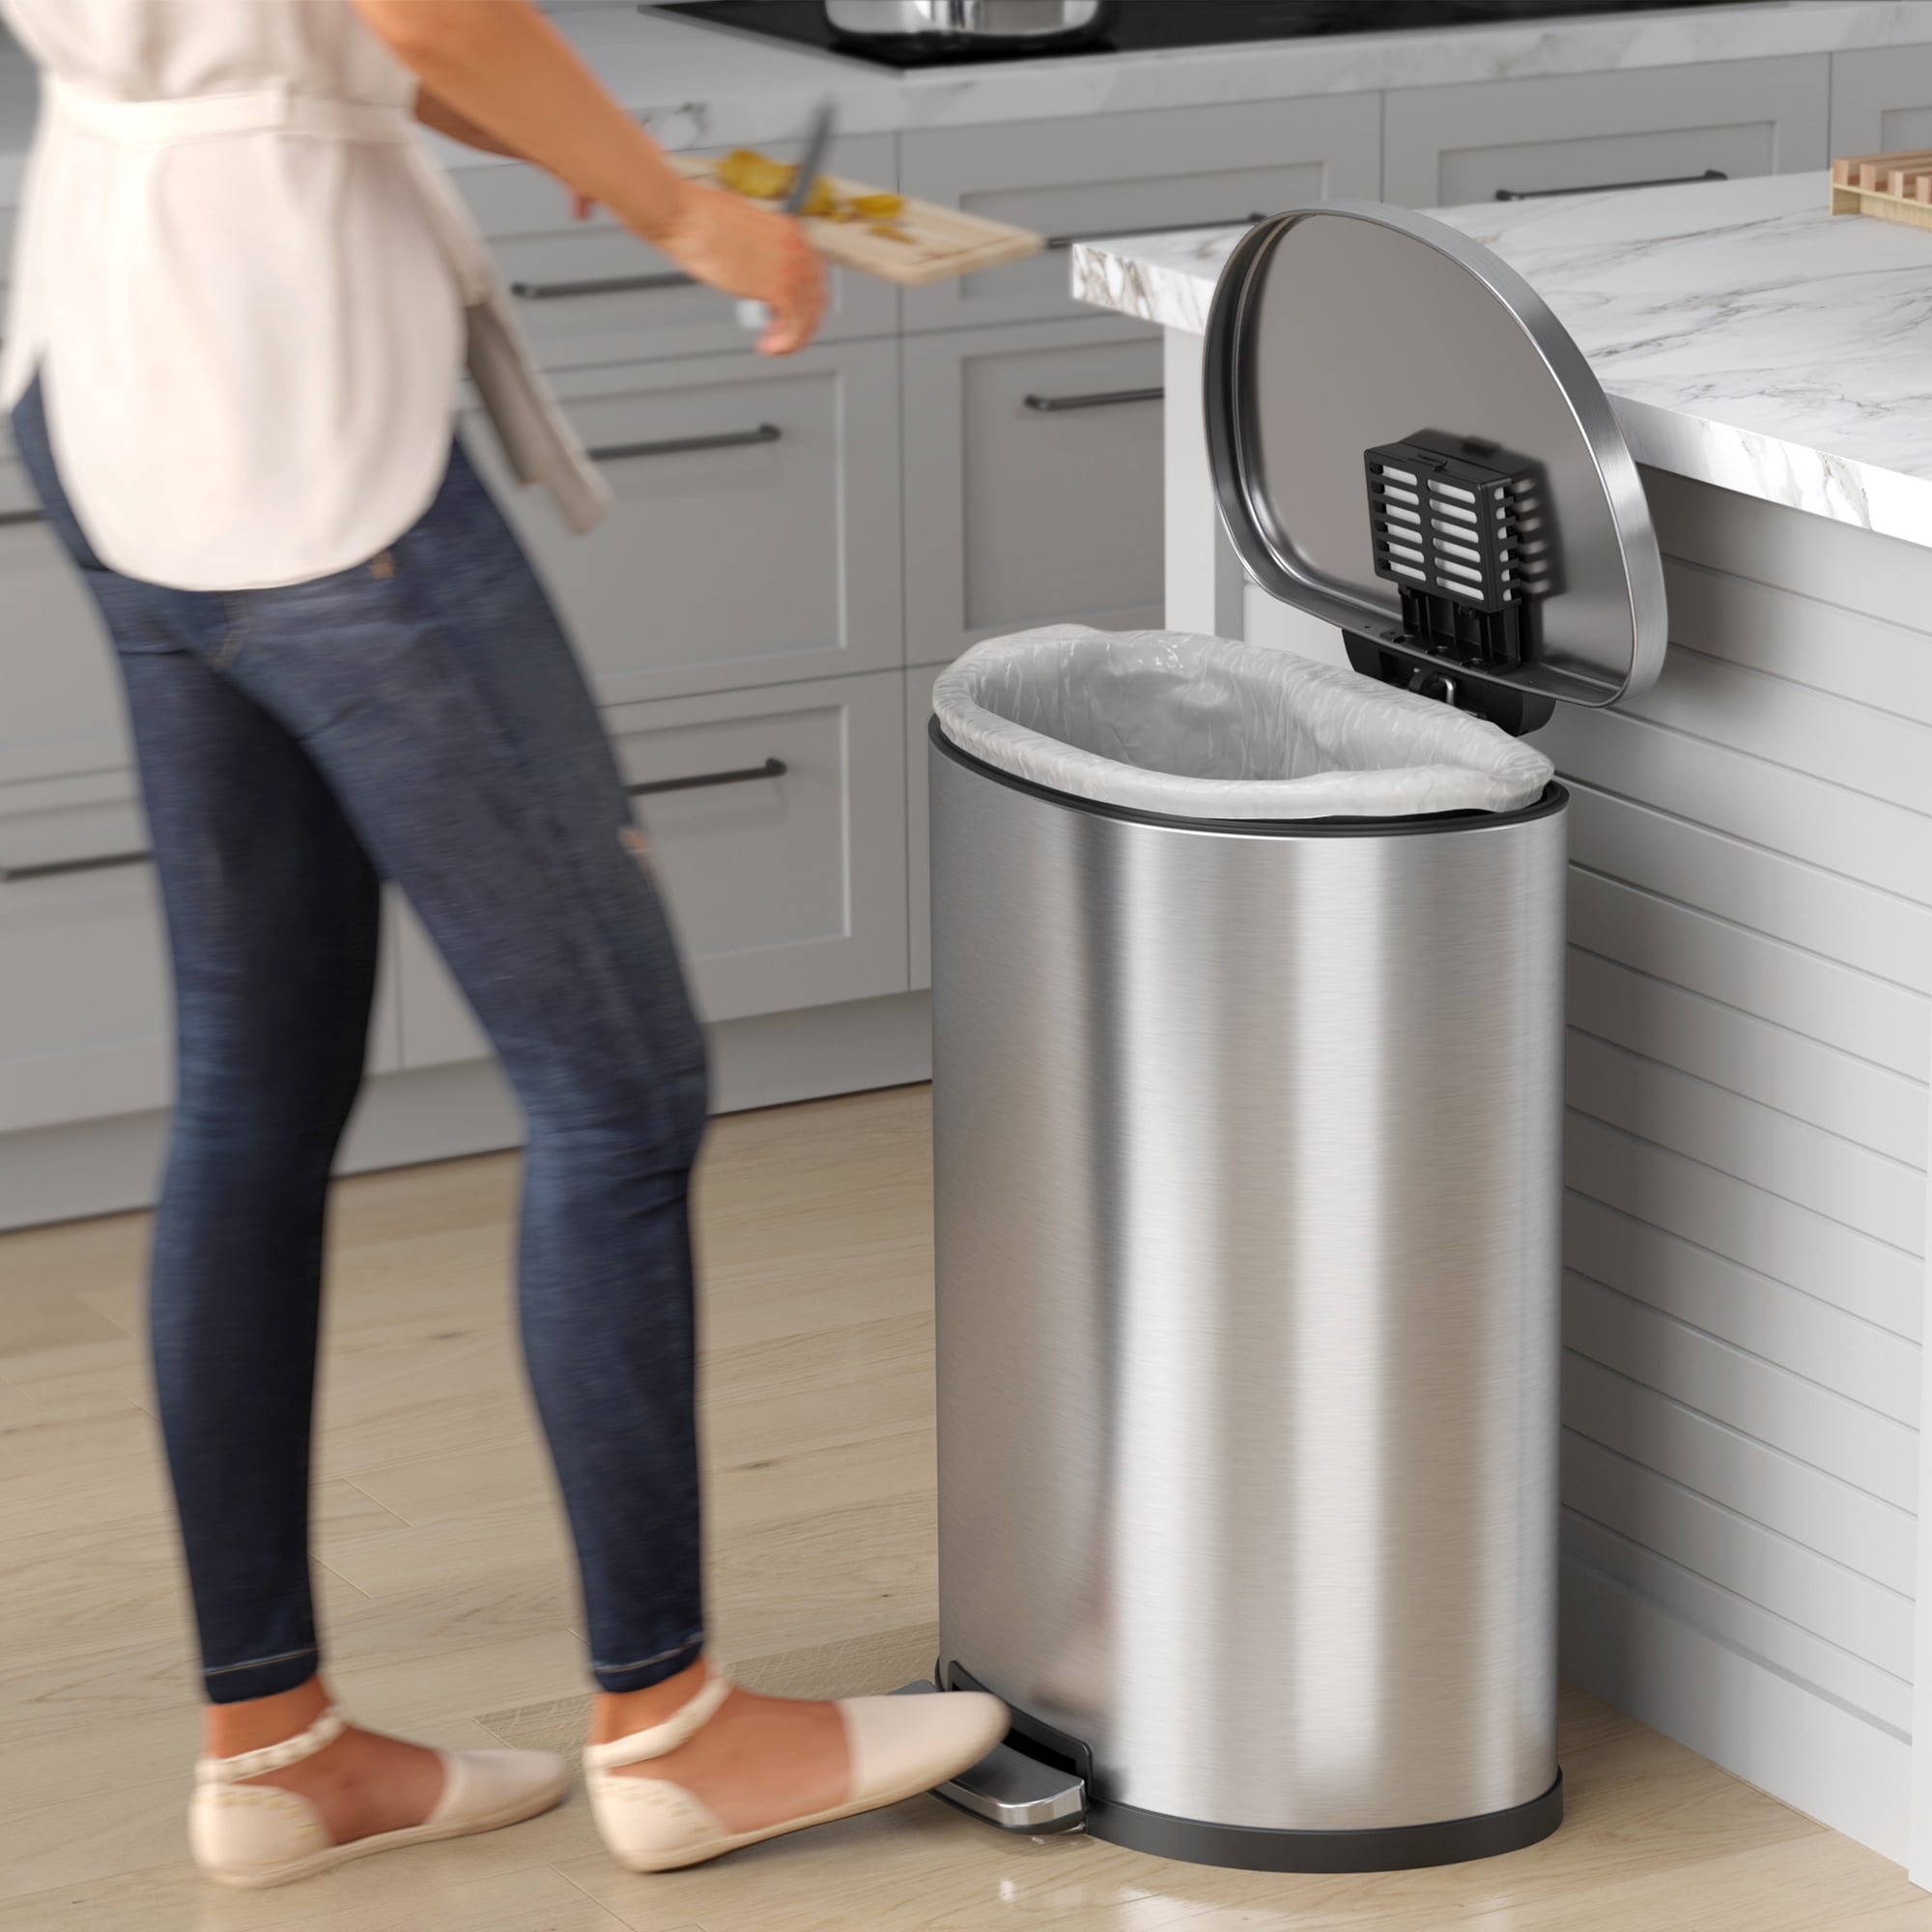 iTouchless SoftStep 2 Gallon Small Semi-Round Bathroom Step Trash Can with AbsorbX Odor Filter and Removable Inner Bucket, Stainless Steel, 7 Liter